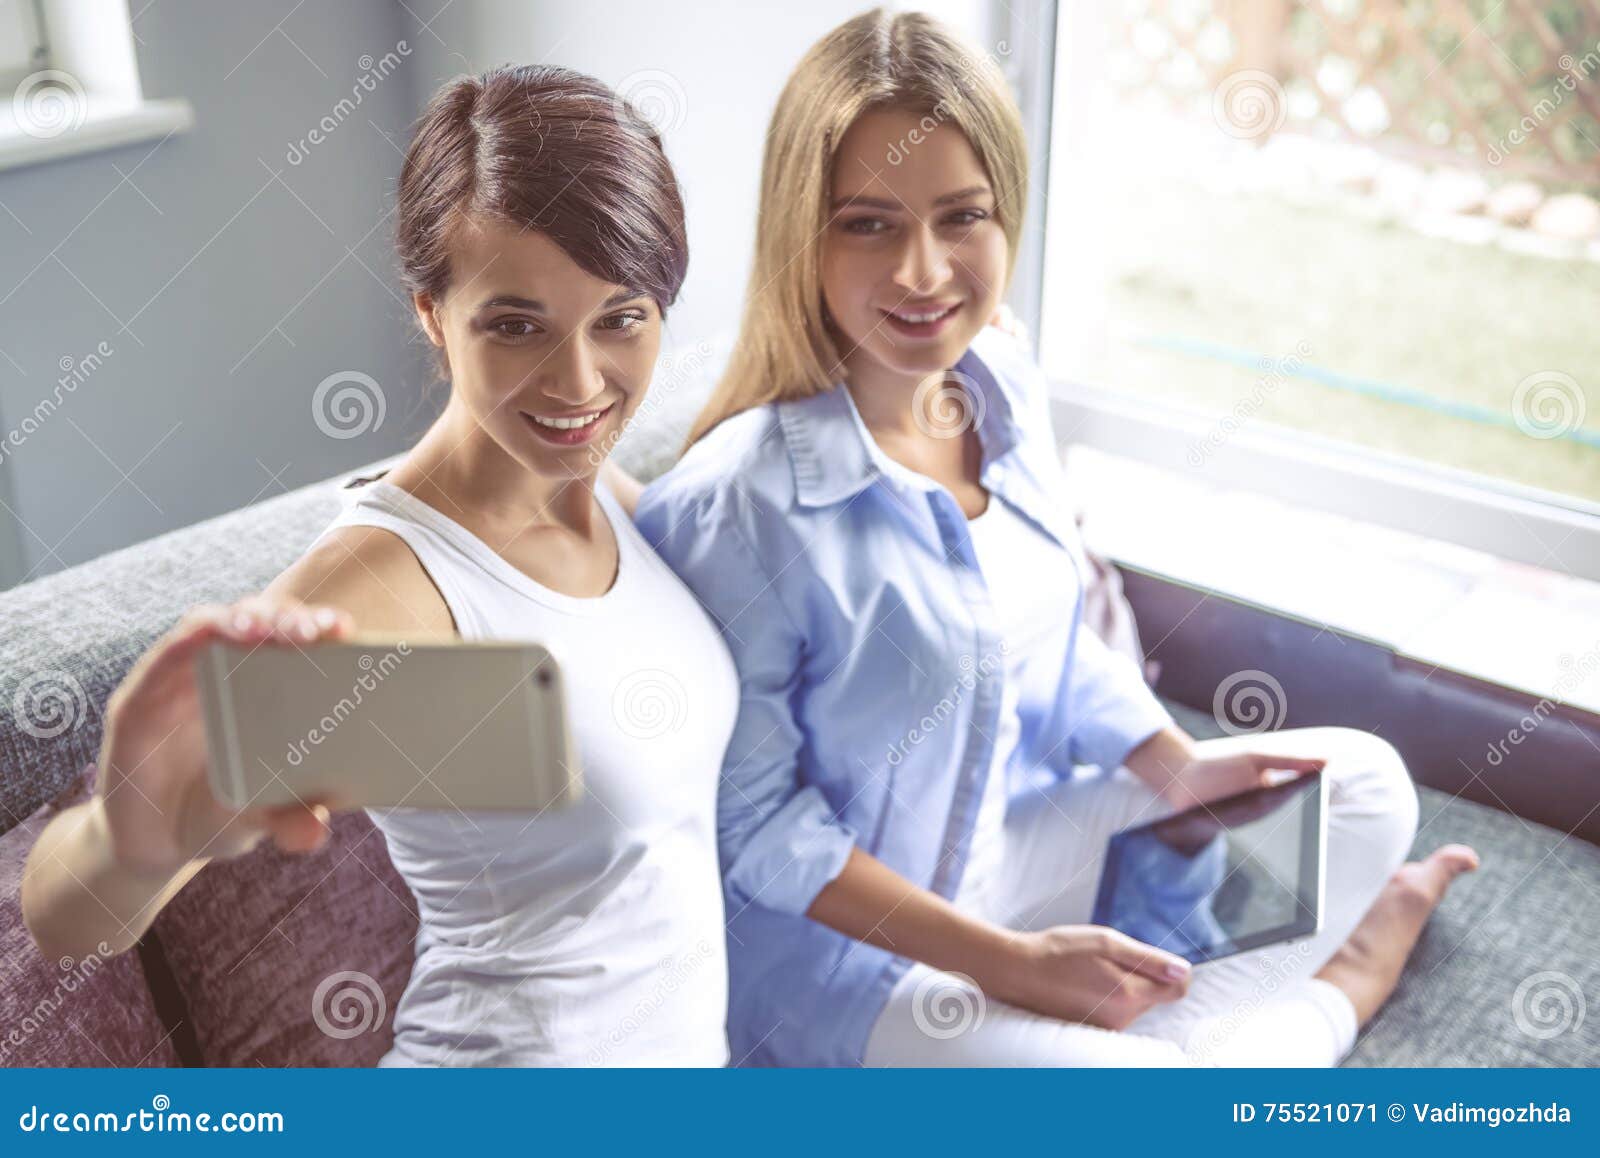 Girls with gadget stock image. Image of expression, people - 75521071